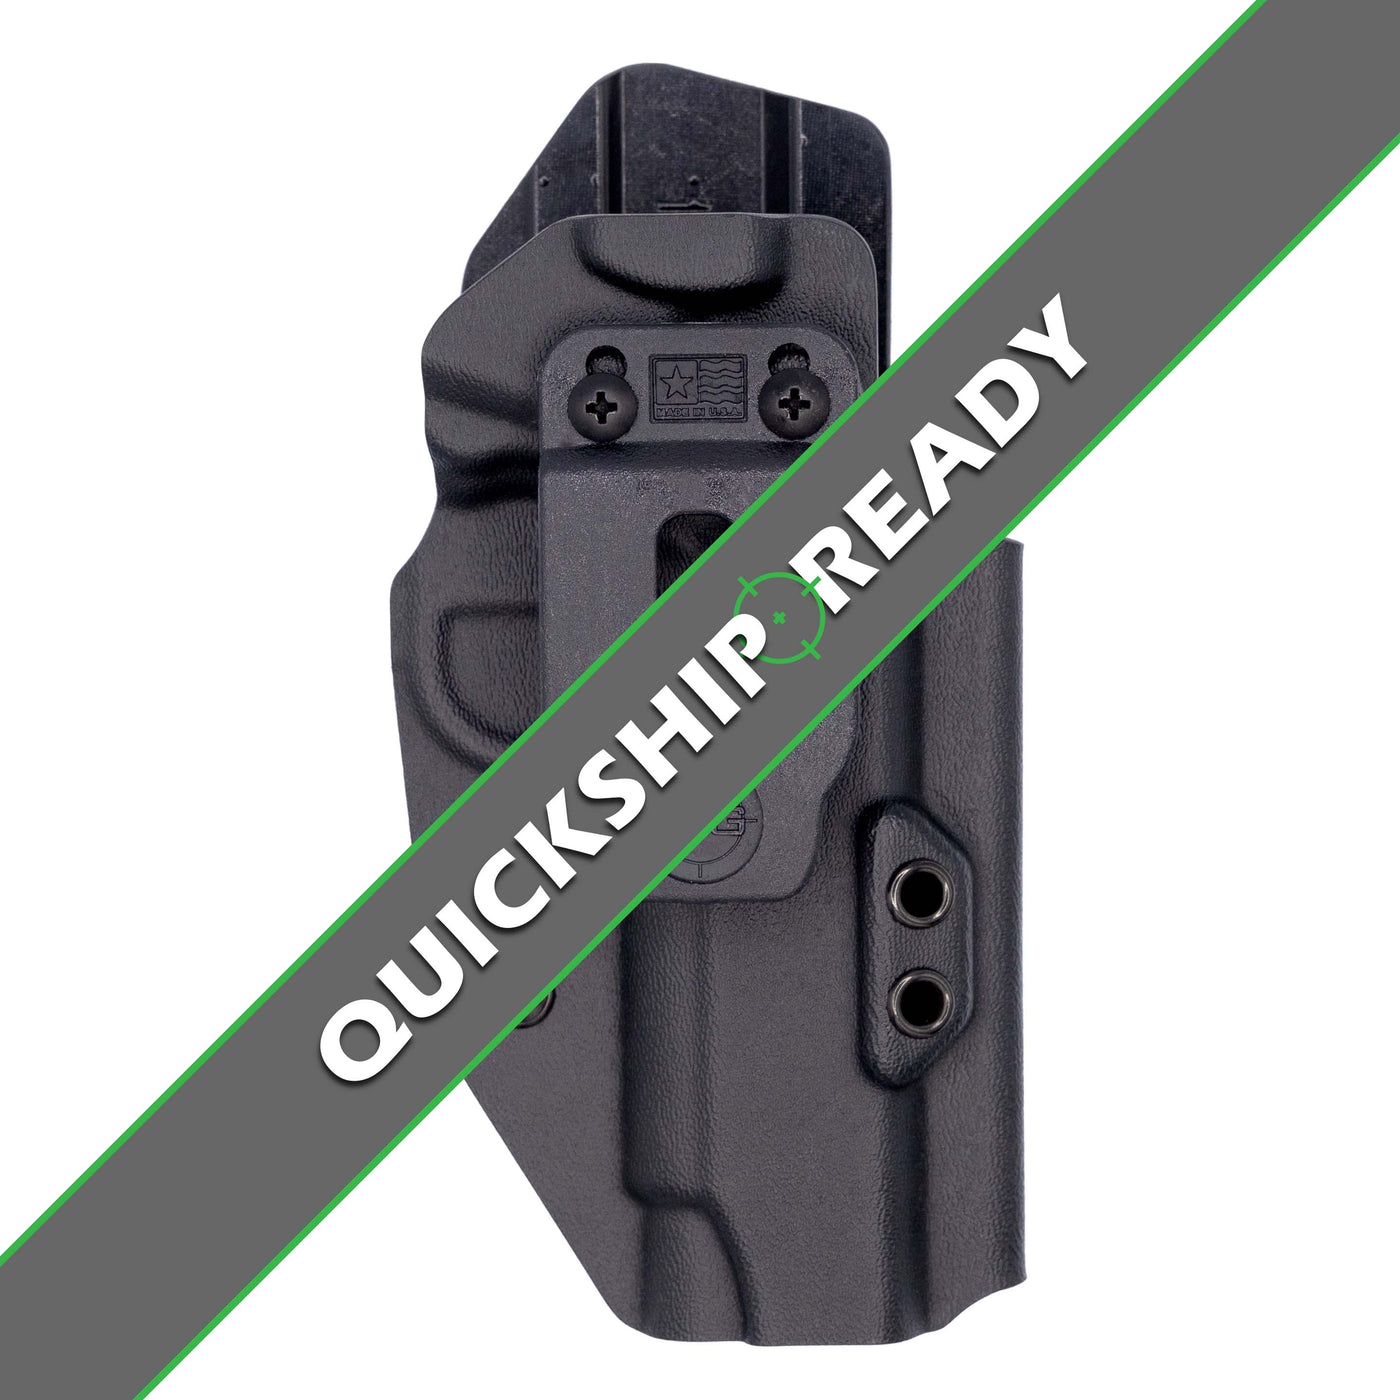 This is the quickship C&G Holsters inside the waistband holster for a 1911 Colt commander model.